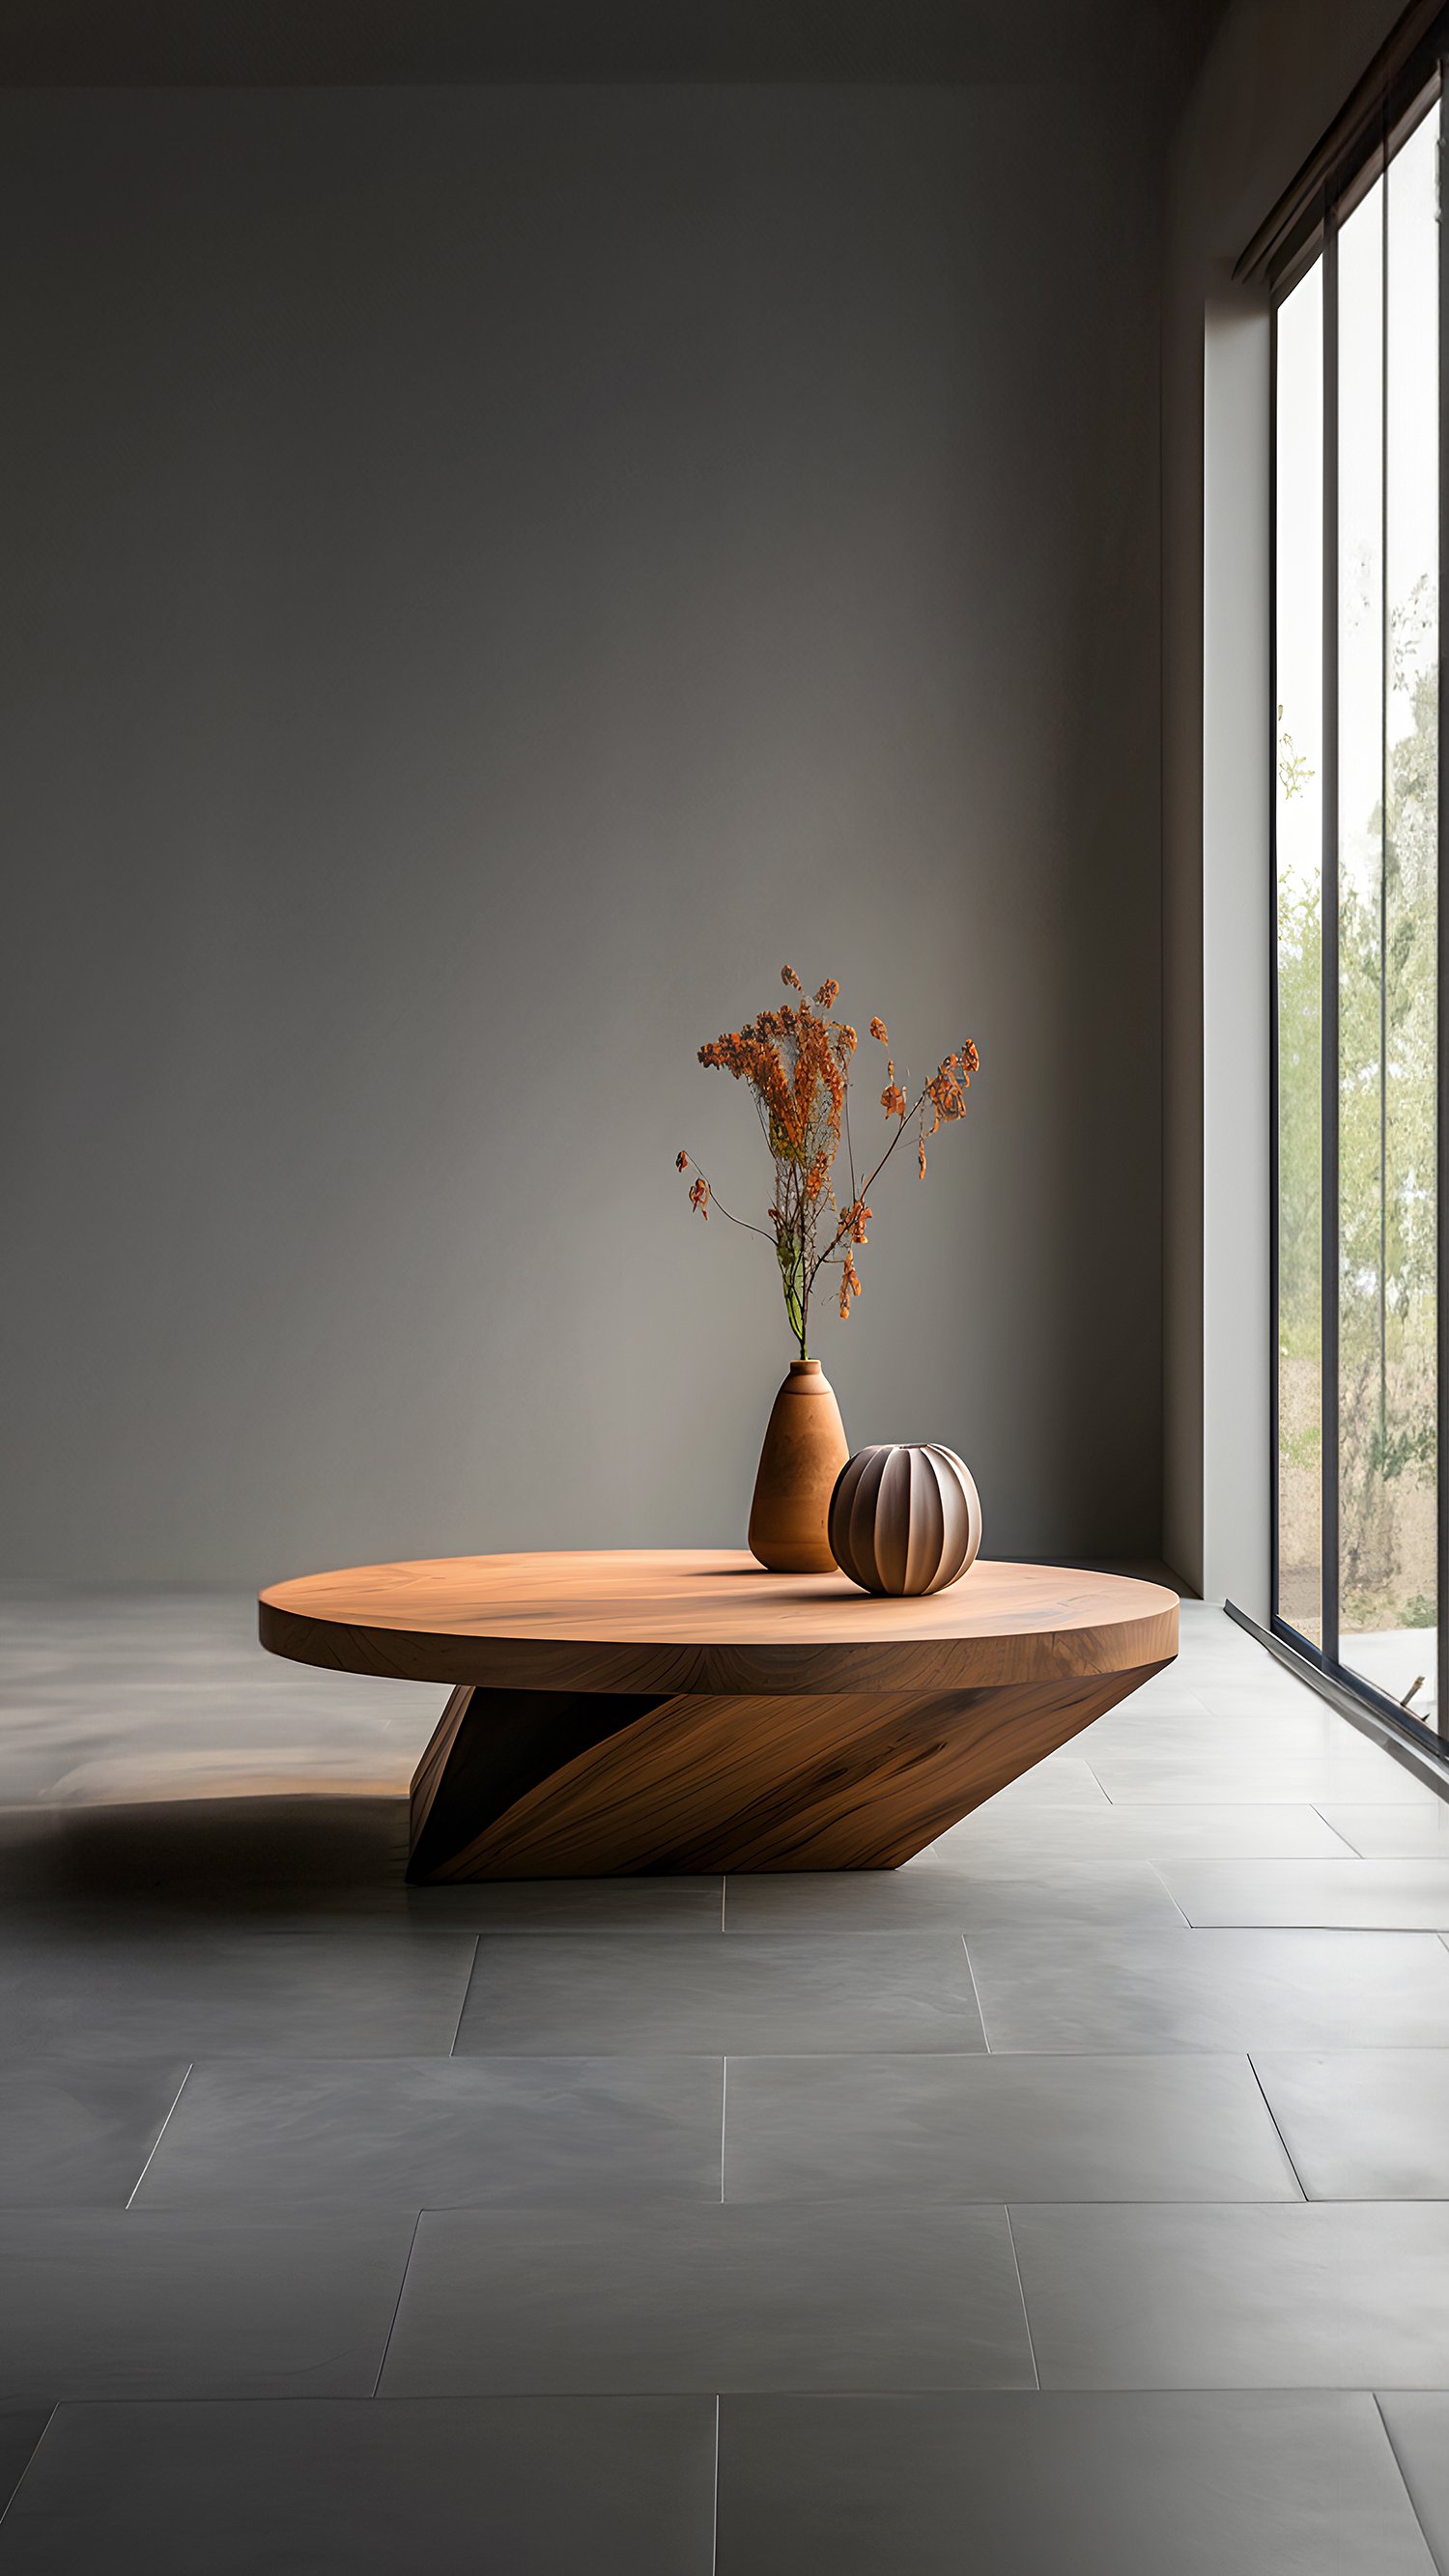 Sculptural Coffee Table Made of Solid Wood, Center Table Solace S26 by Joel Escalona —6.jpg